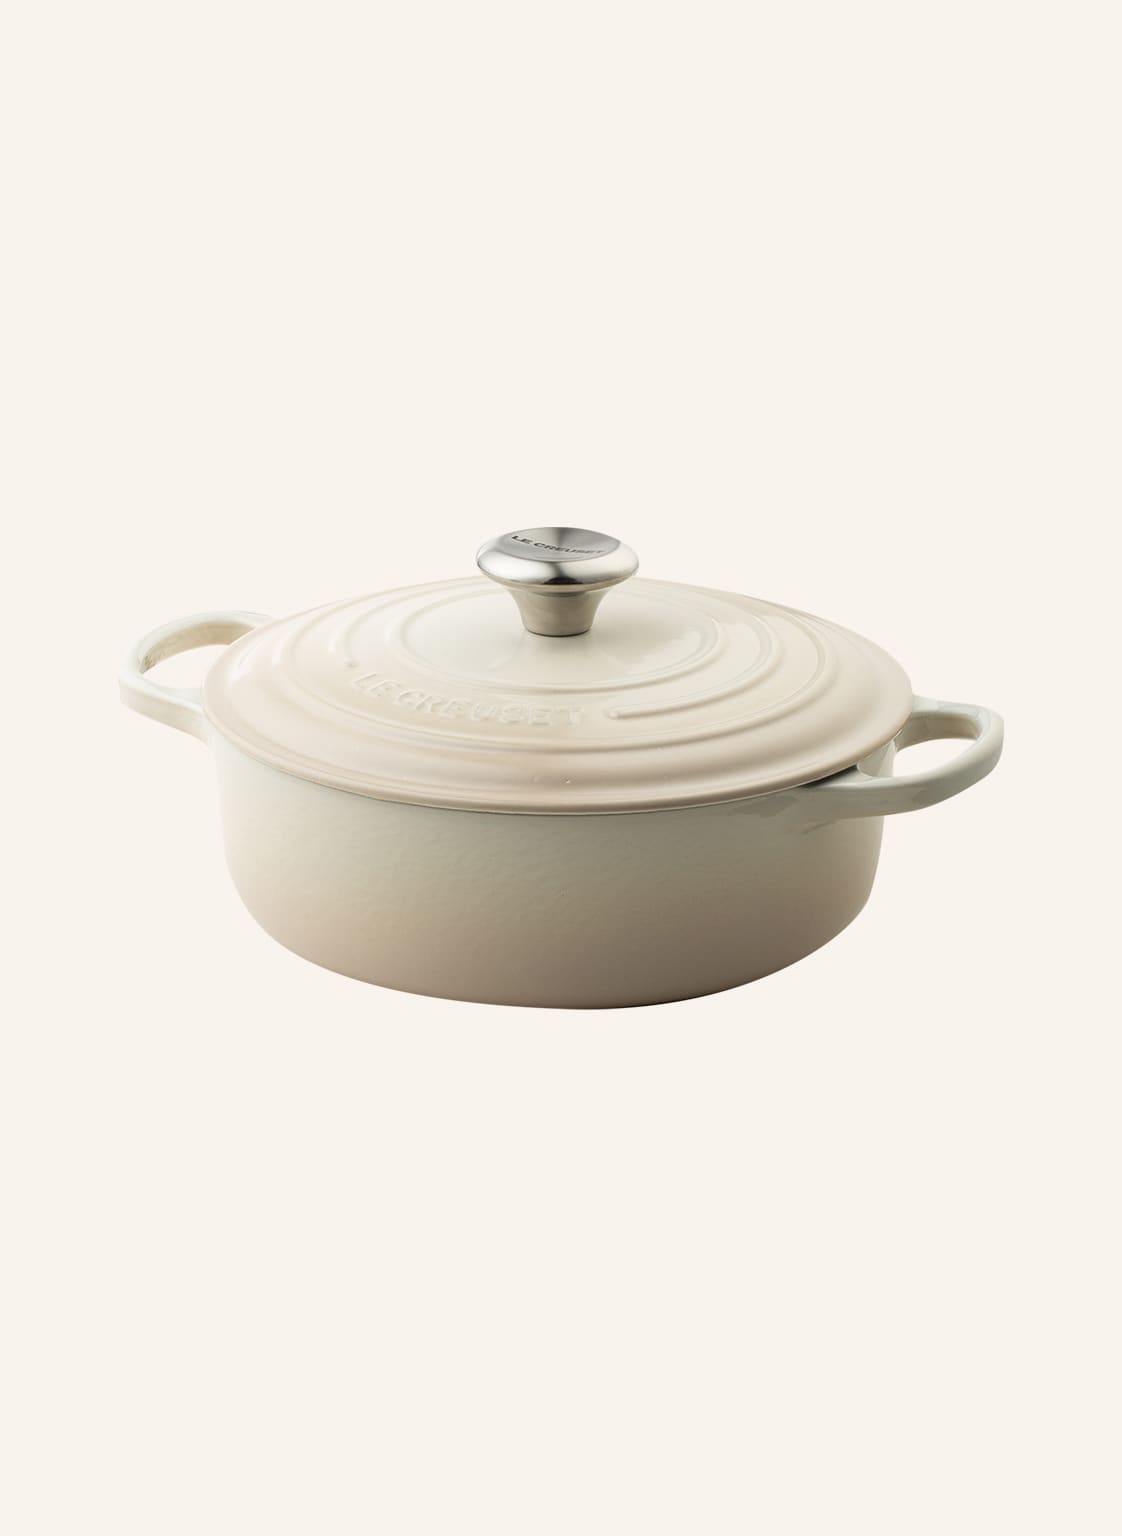 Image of Le Creuset Bräter Signature weiss